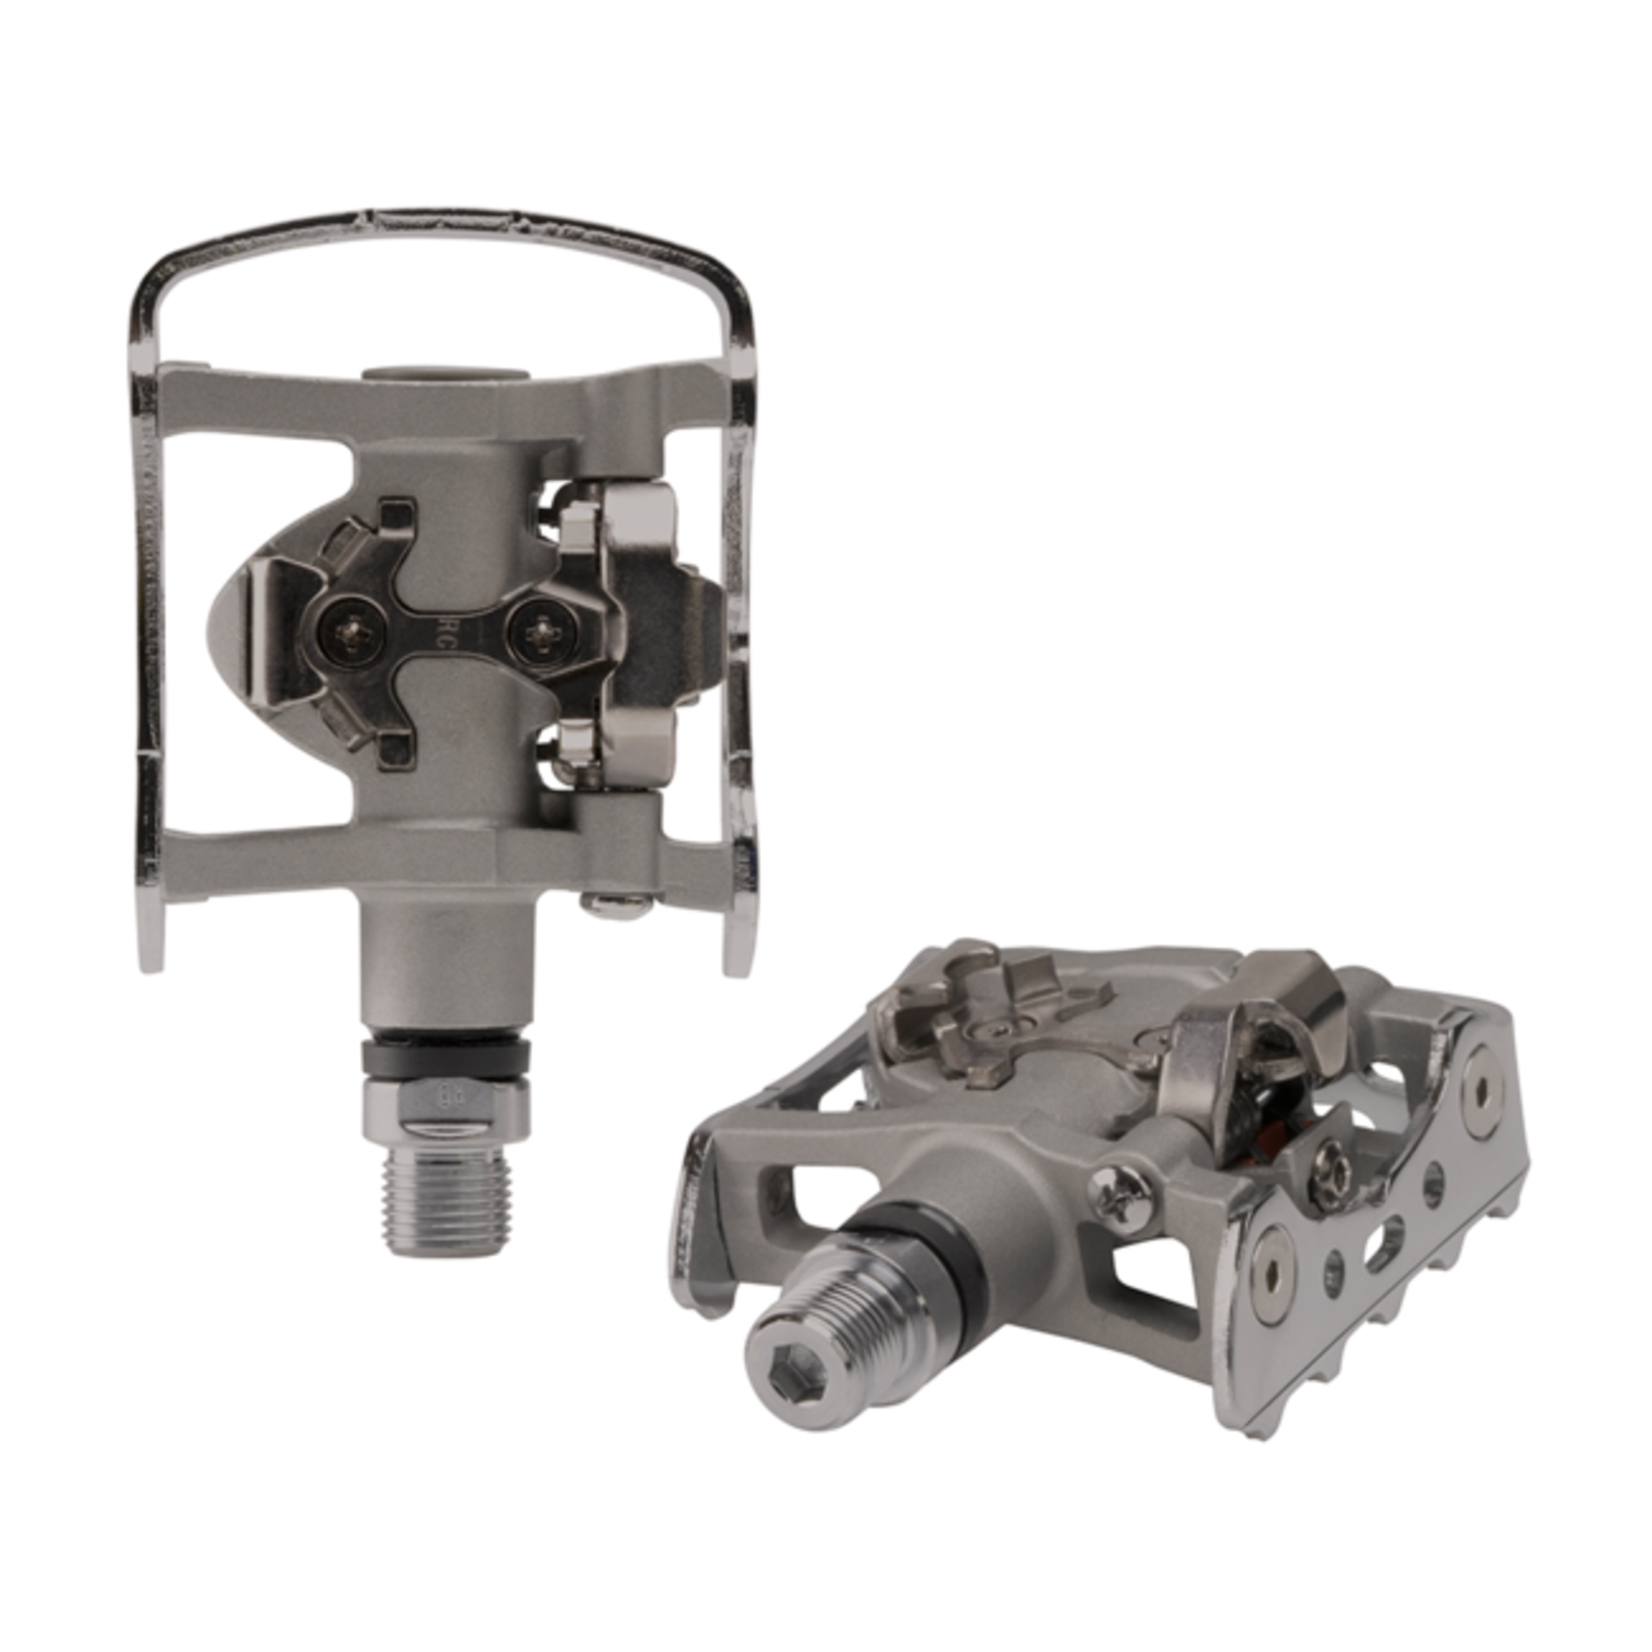 Shimano PD-M324 Pedal with Cleat